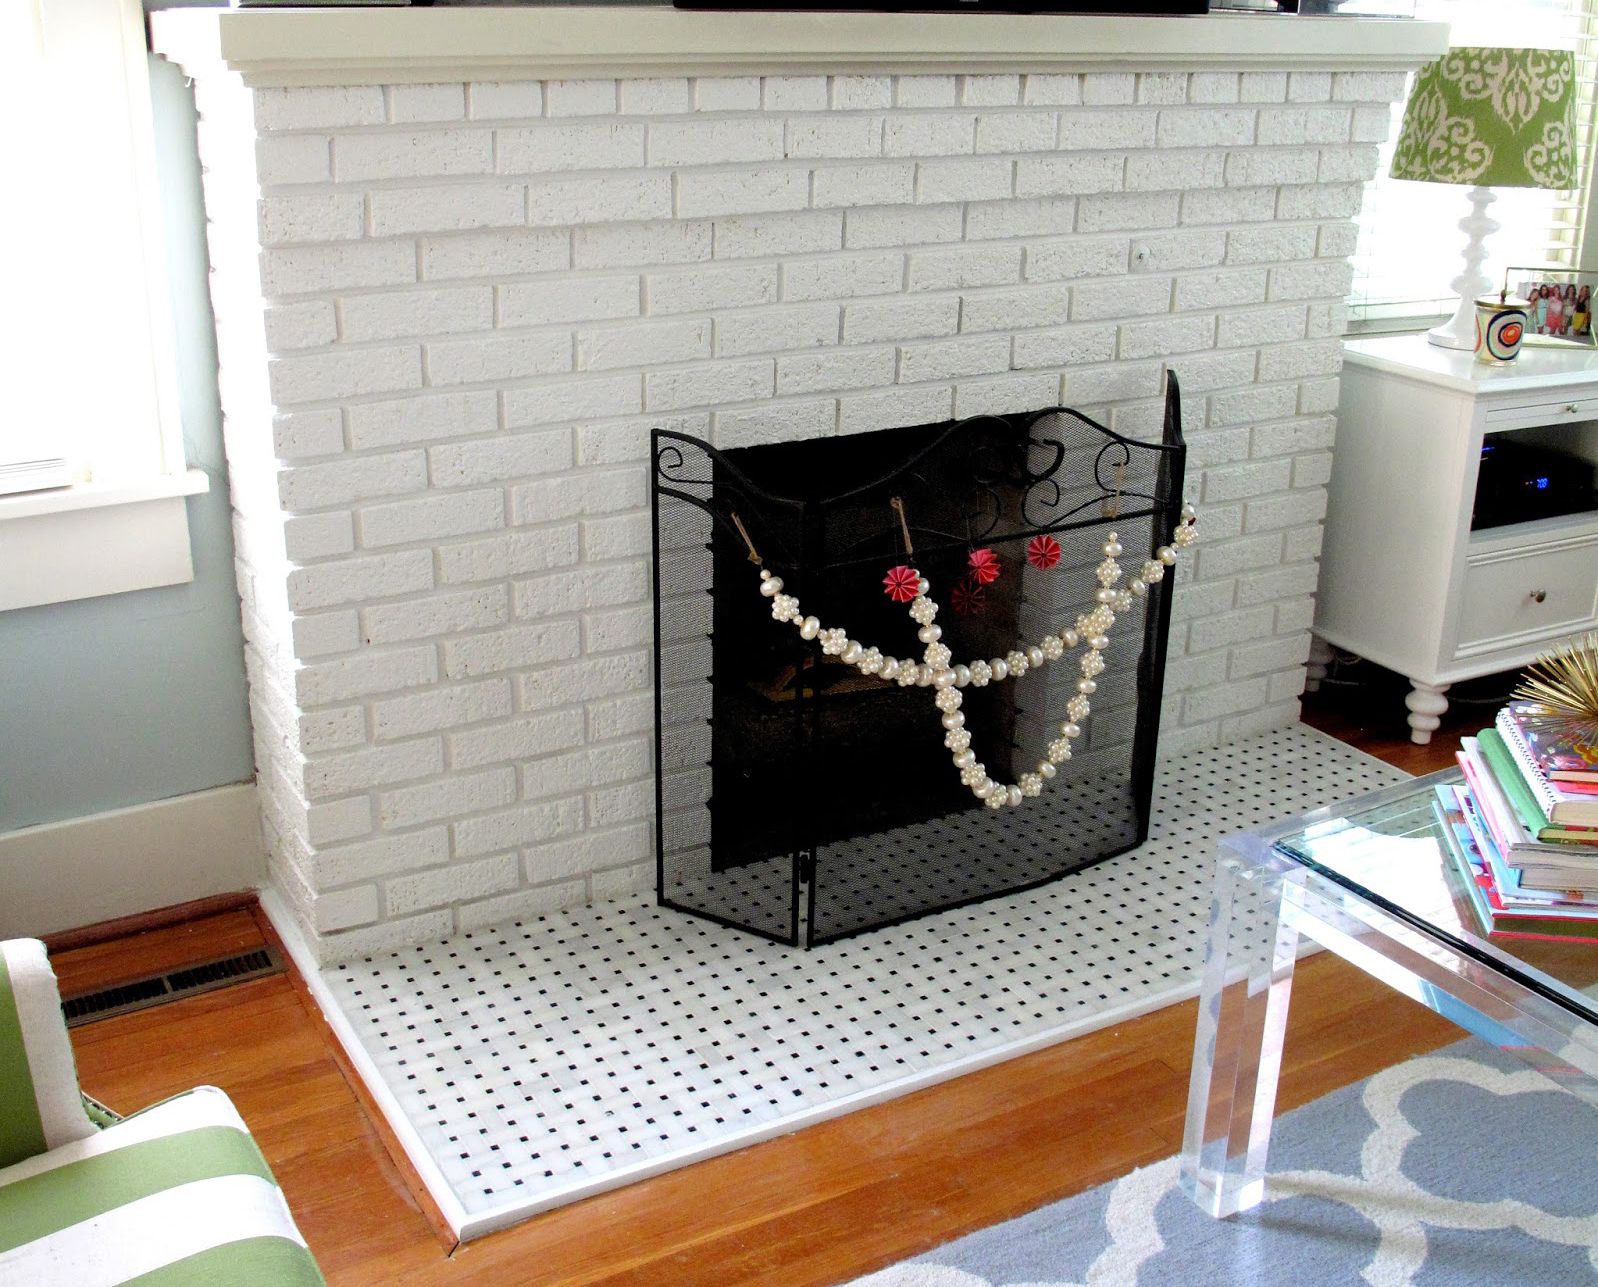 How to Mount Tv On Brick Fireplace Awesome 25 Beautifully Tiled Fireplaces